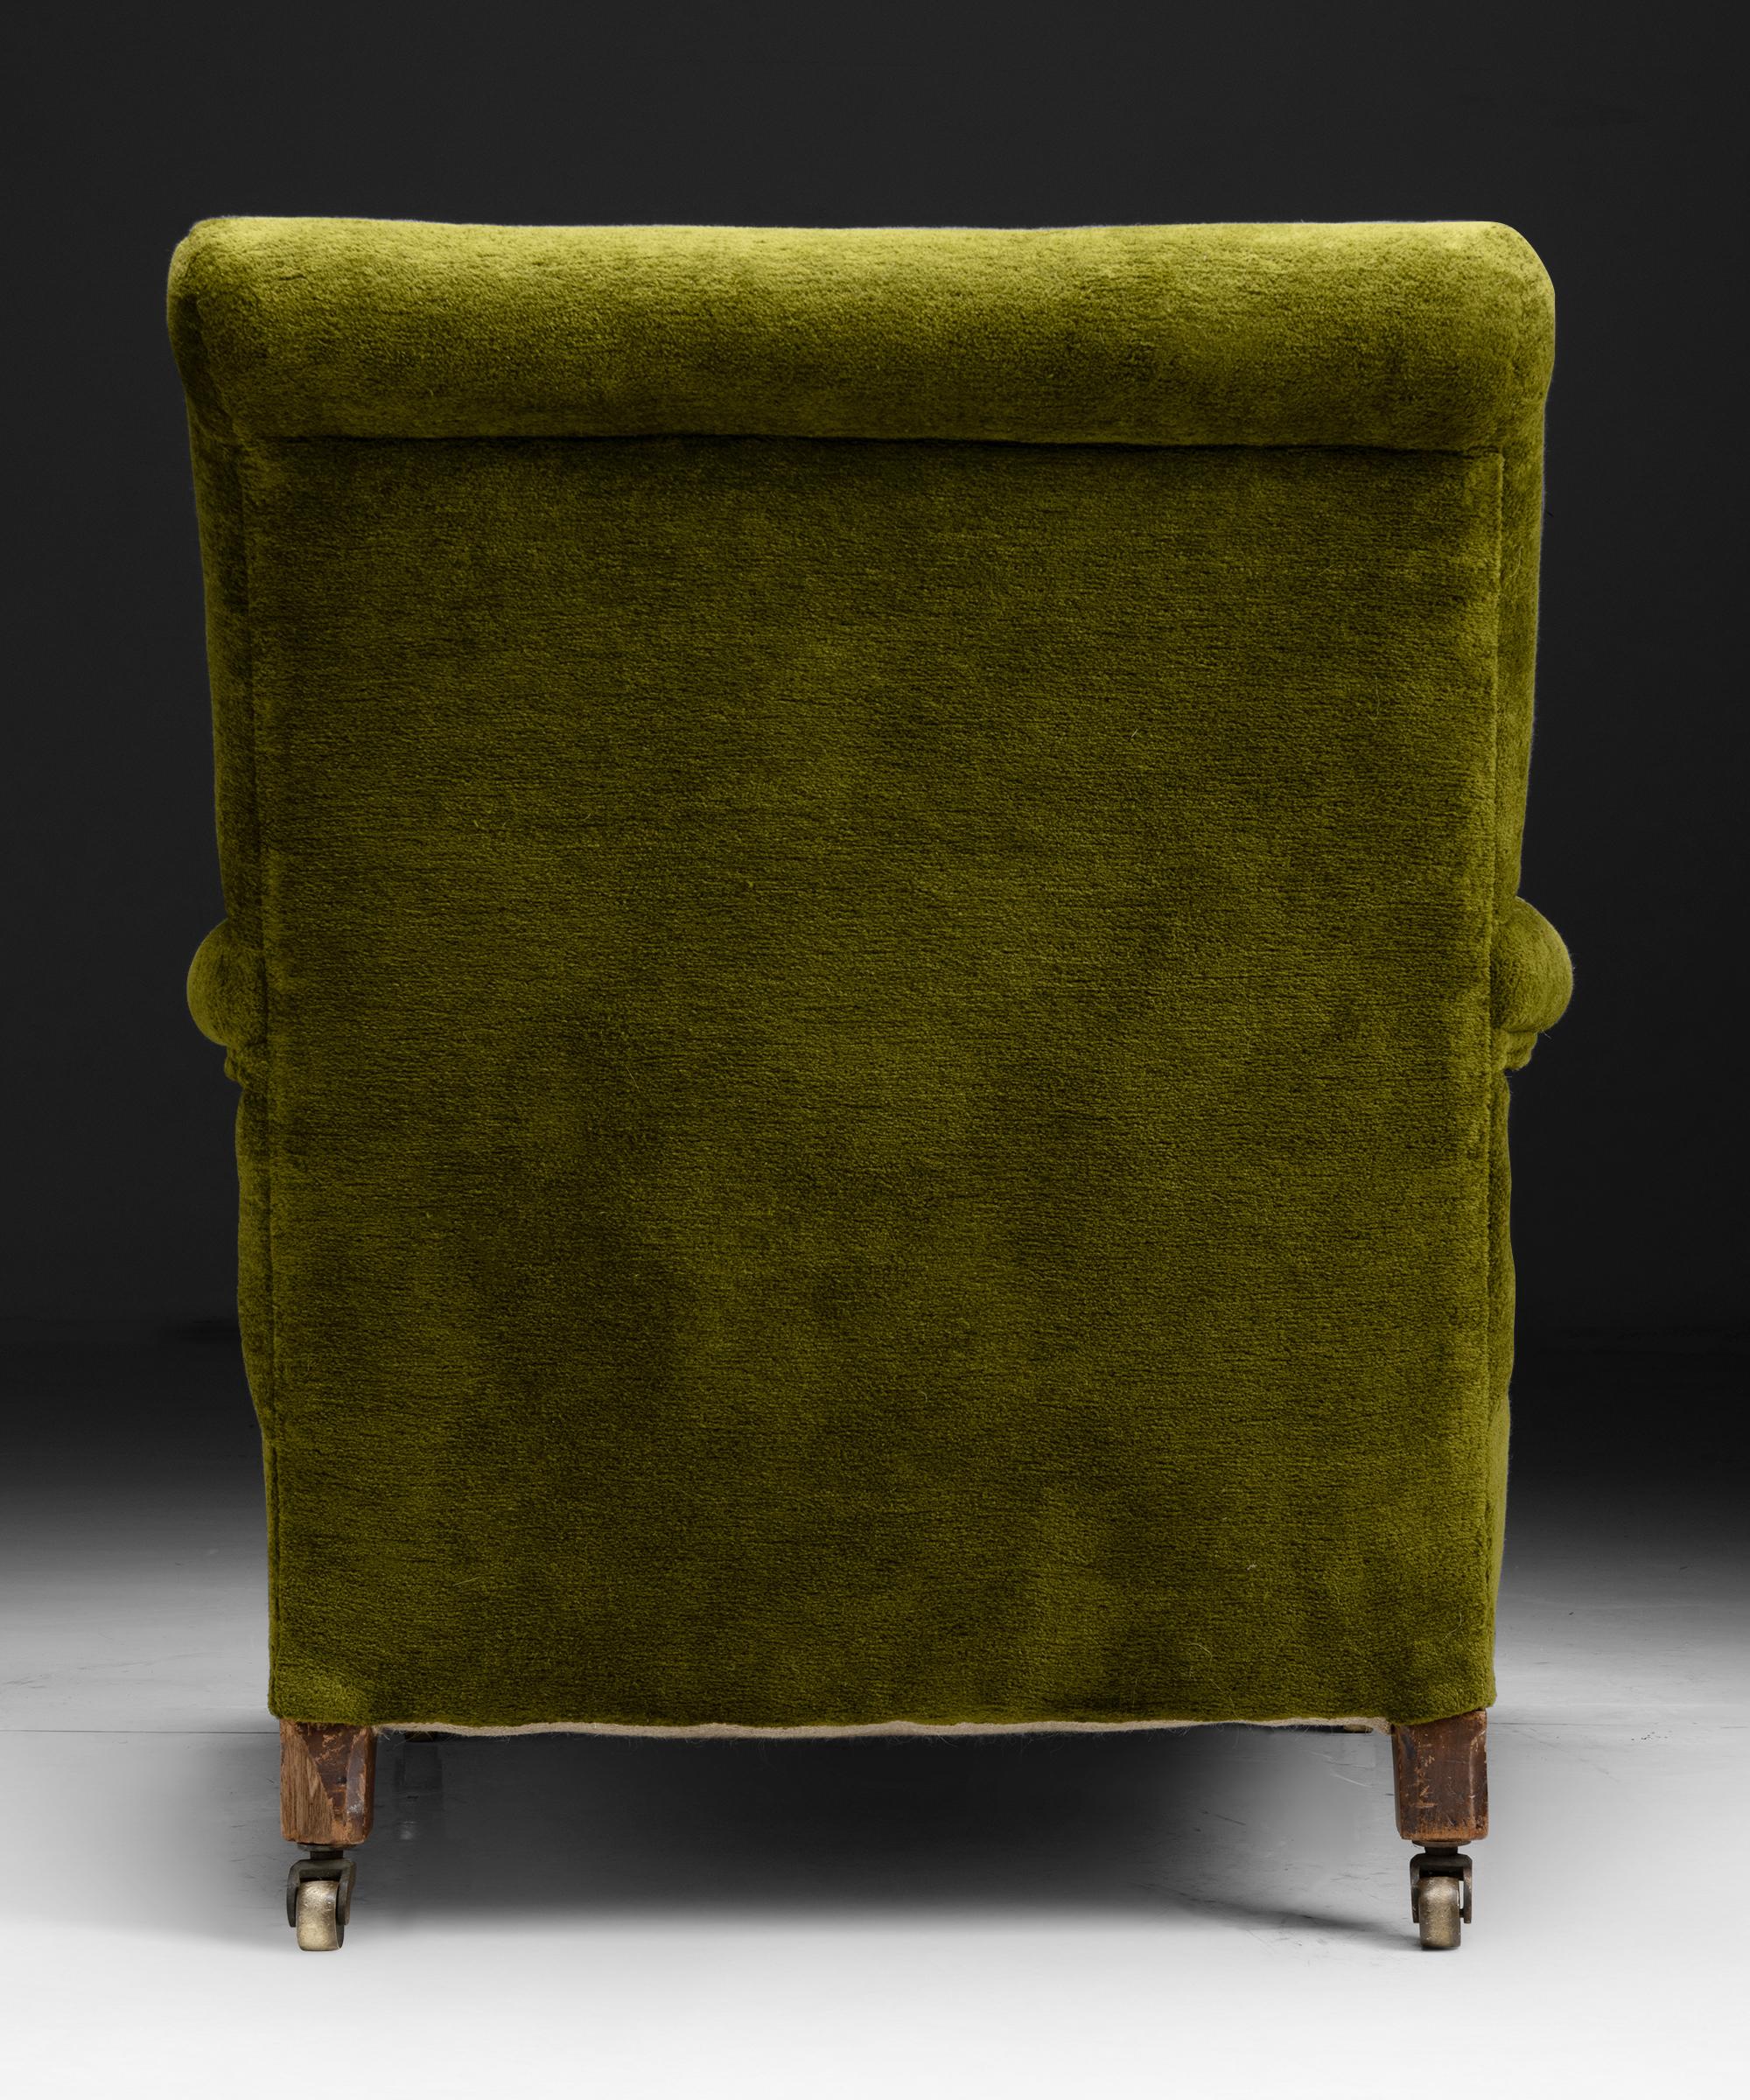 Early 20th Century Open Armchair in Chenille by Pierre Frey, England, circa 1900